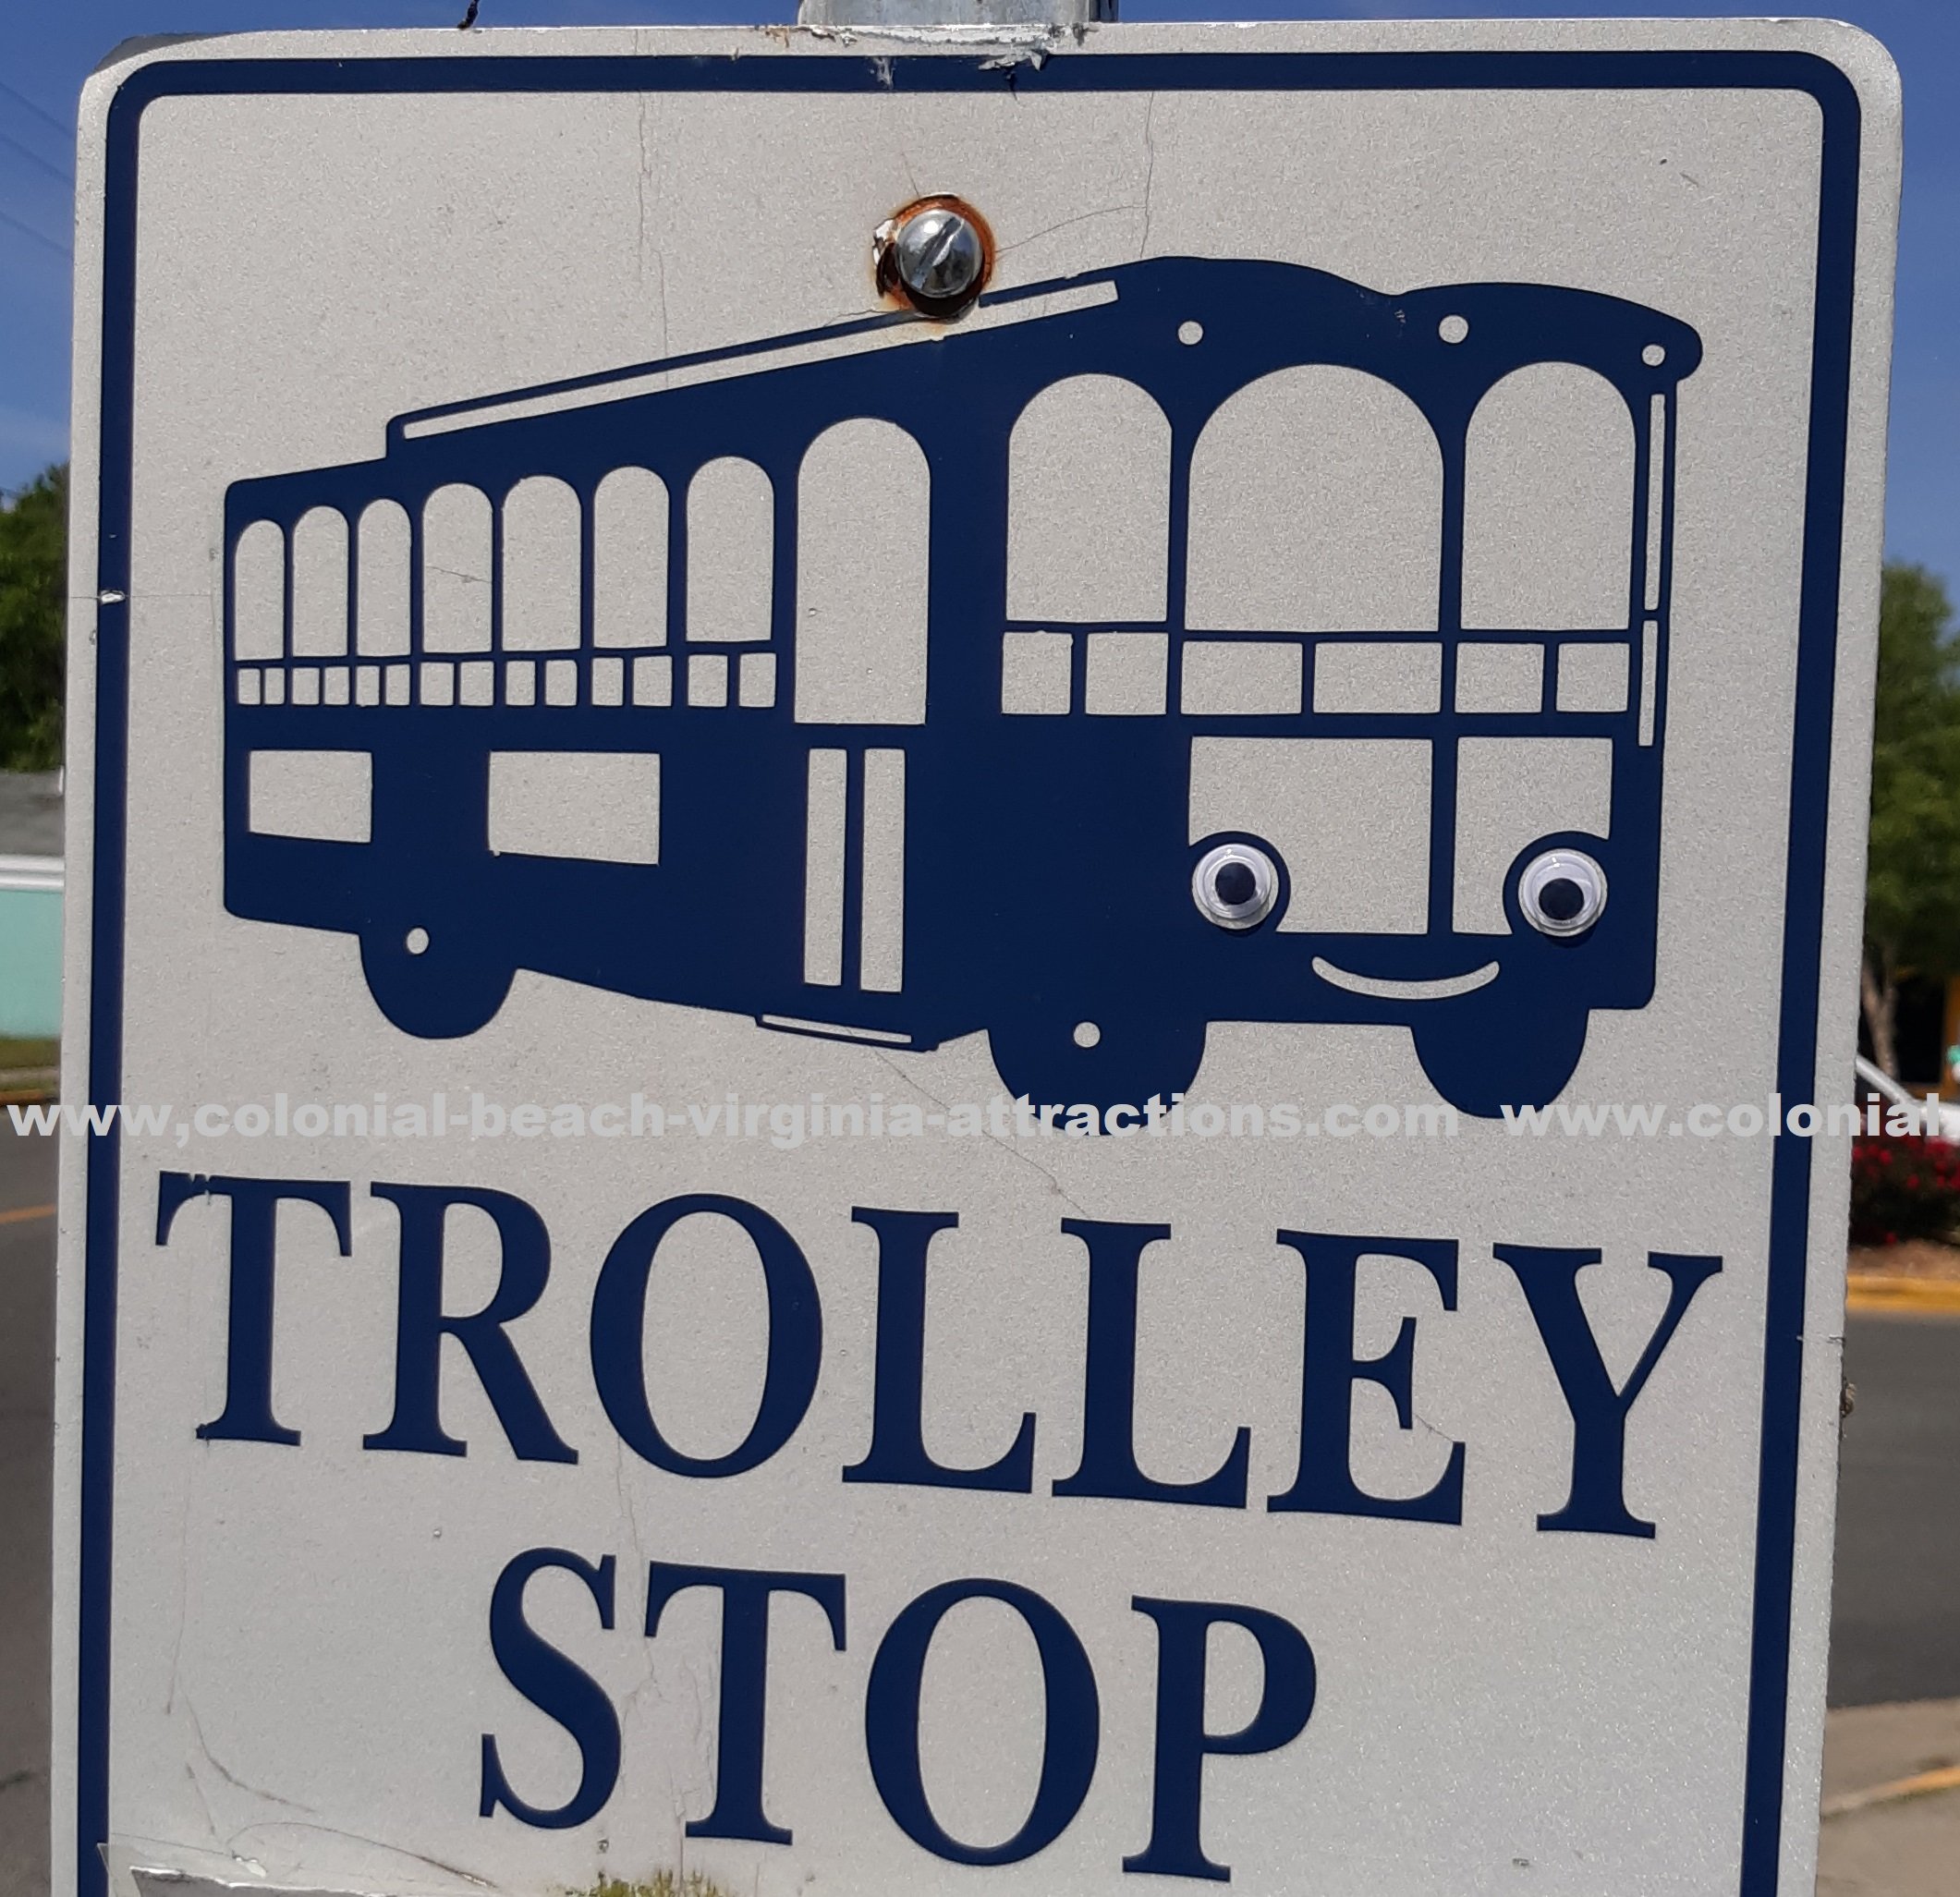 Trolley Stop Sign